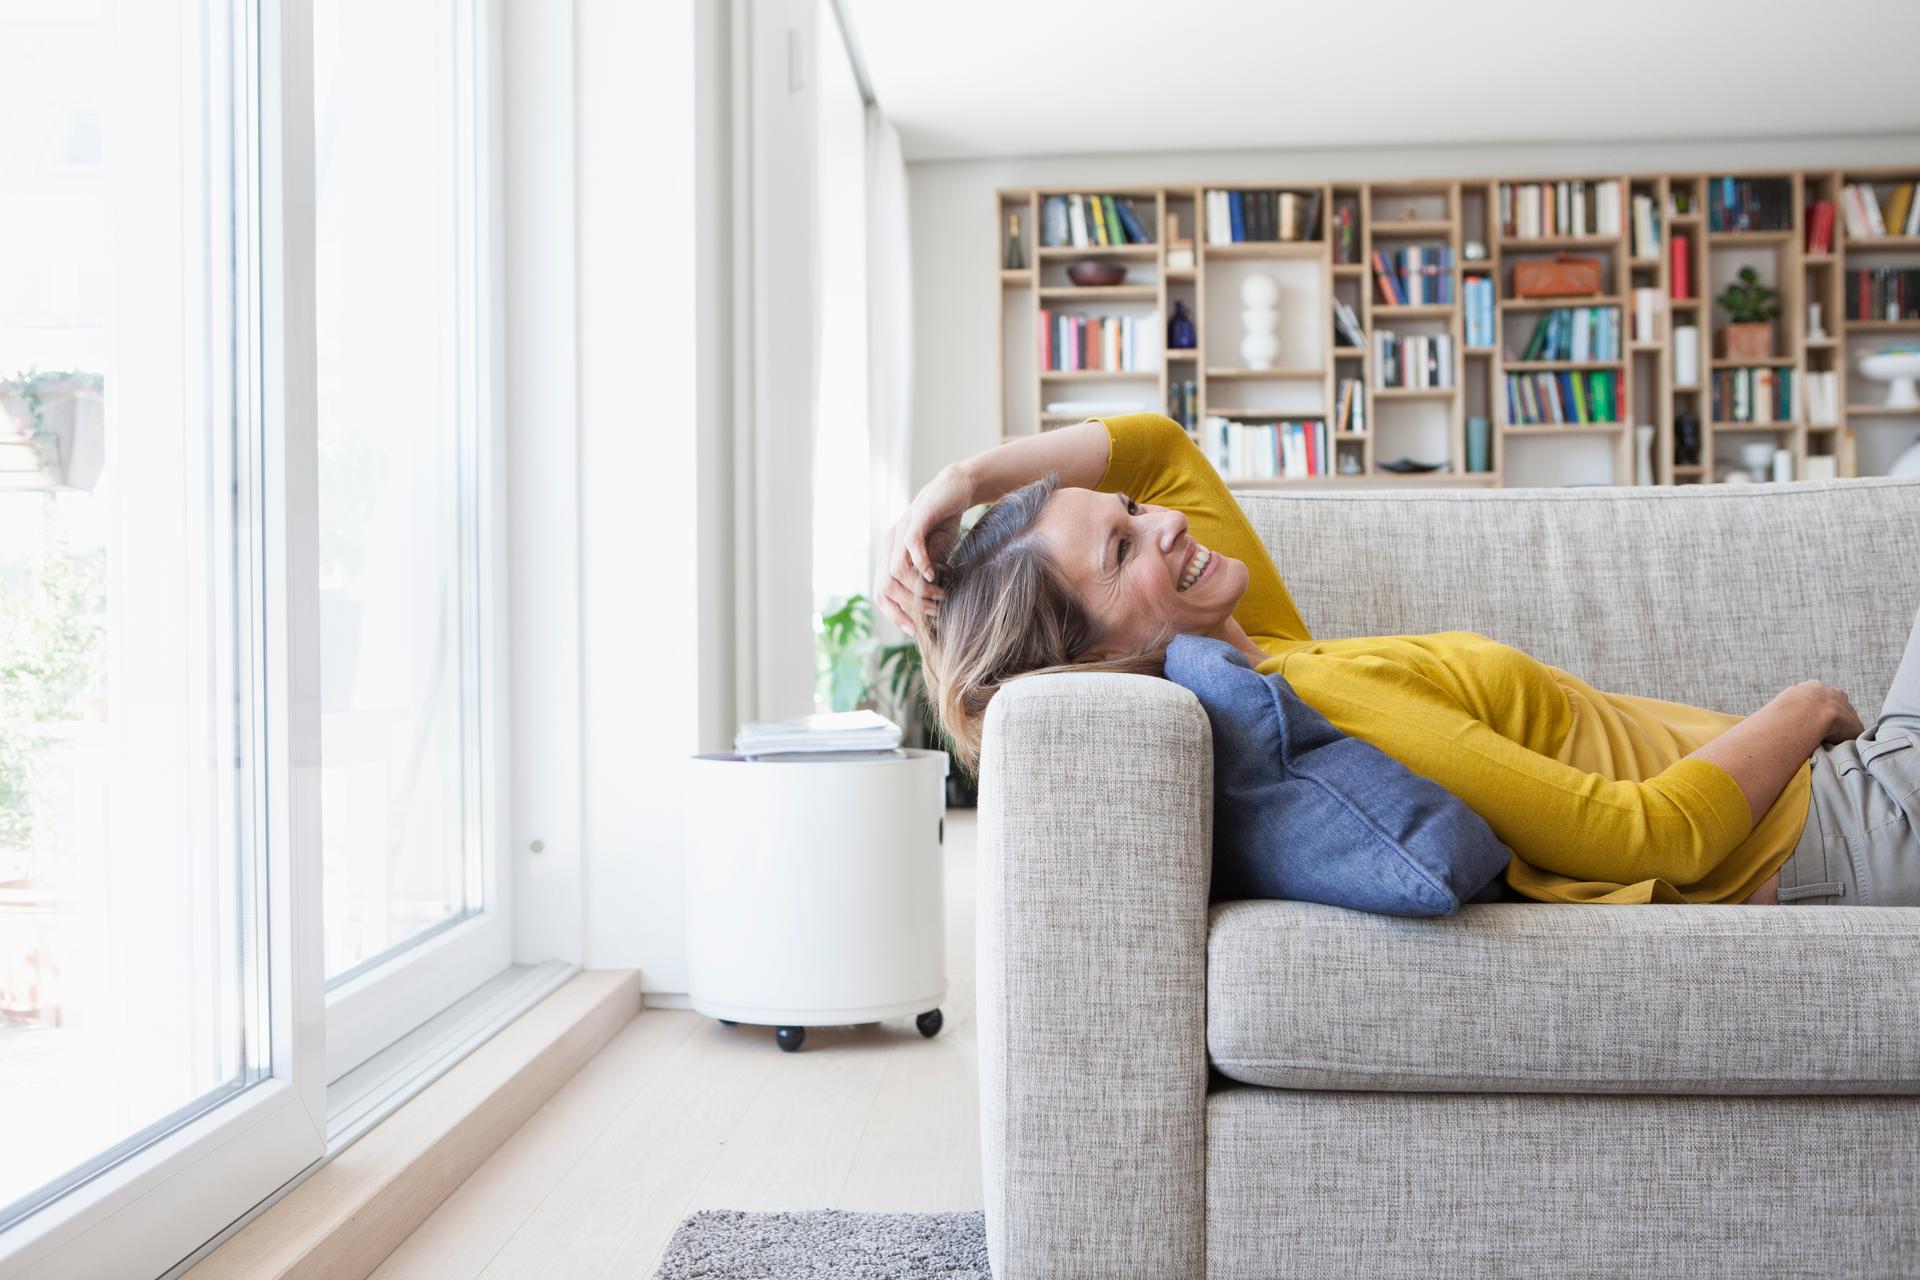 A woman in a yellow sweater is lying on a sofa laughing and enjoying her life insurance.